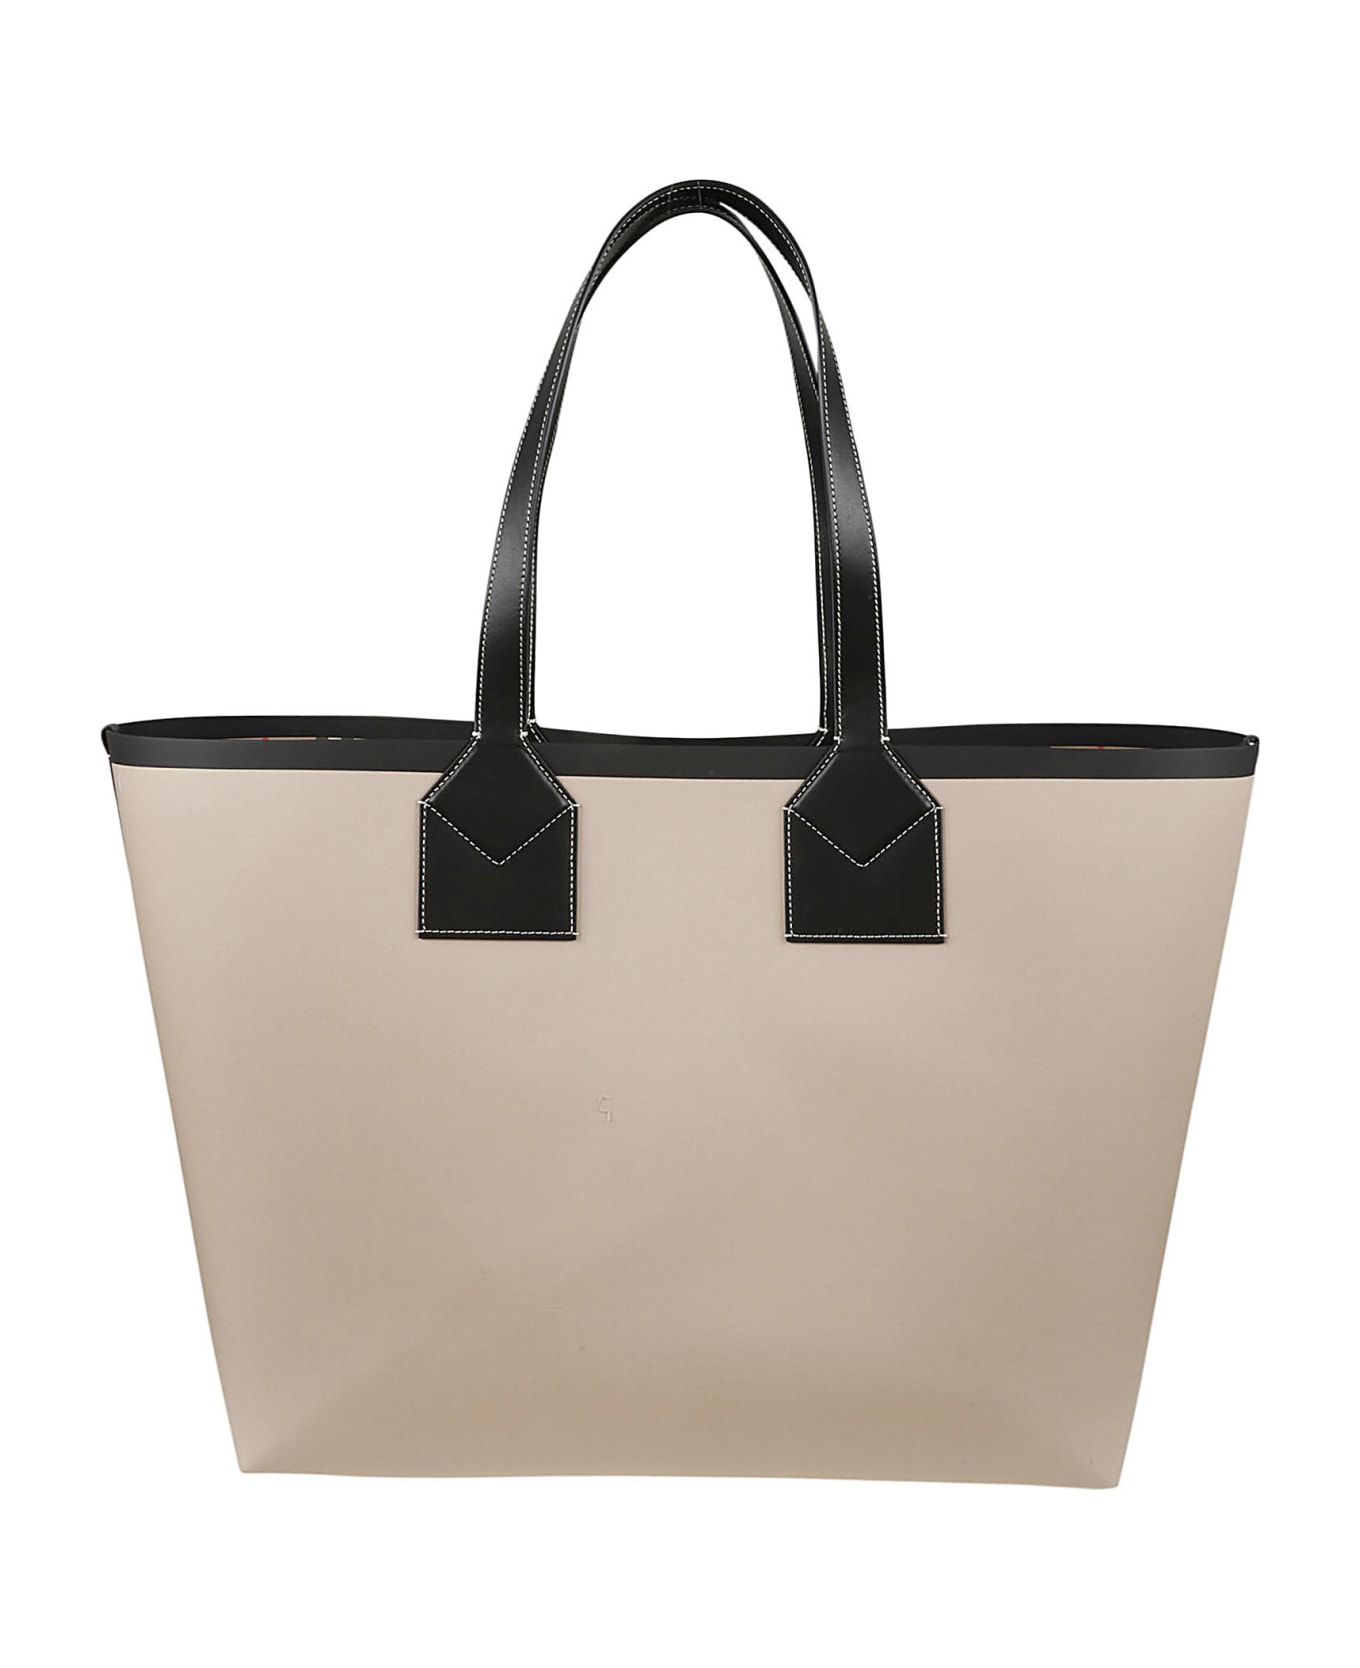 Burberry Large Heritage Tote - Beige